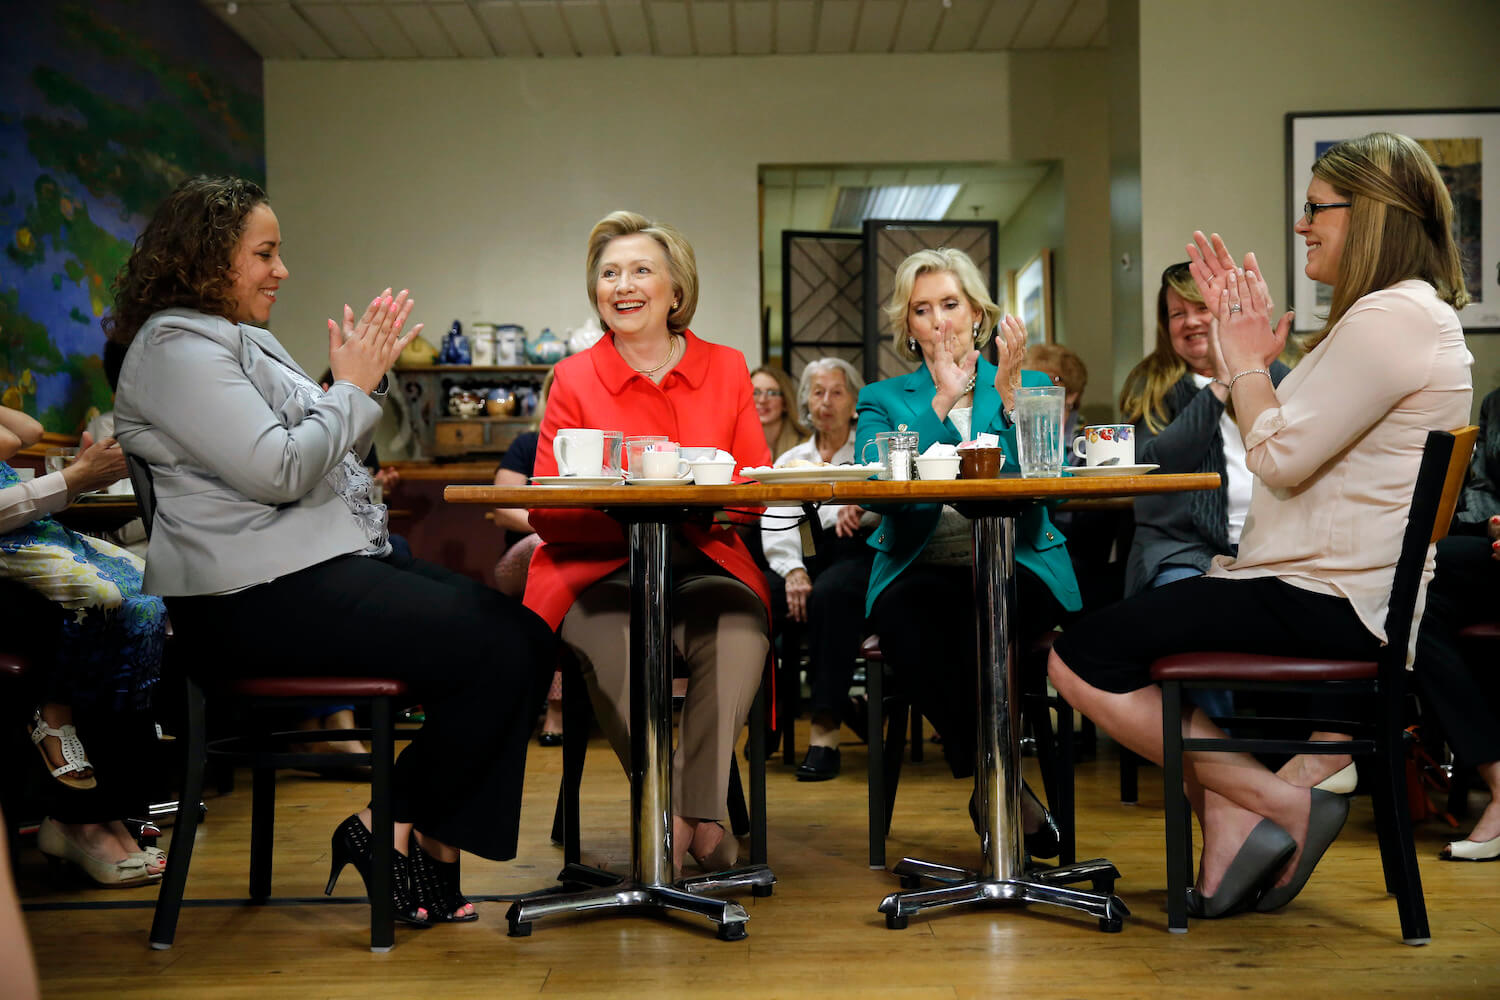 Hillary Clinton sits at a table drinking tea with Lilly Ledbetter and other women. November 2020